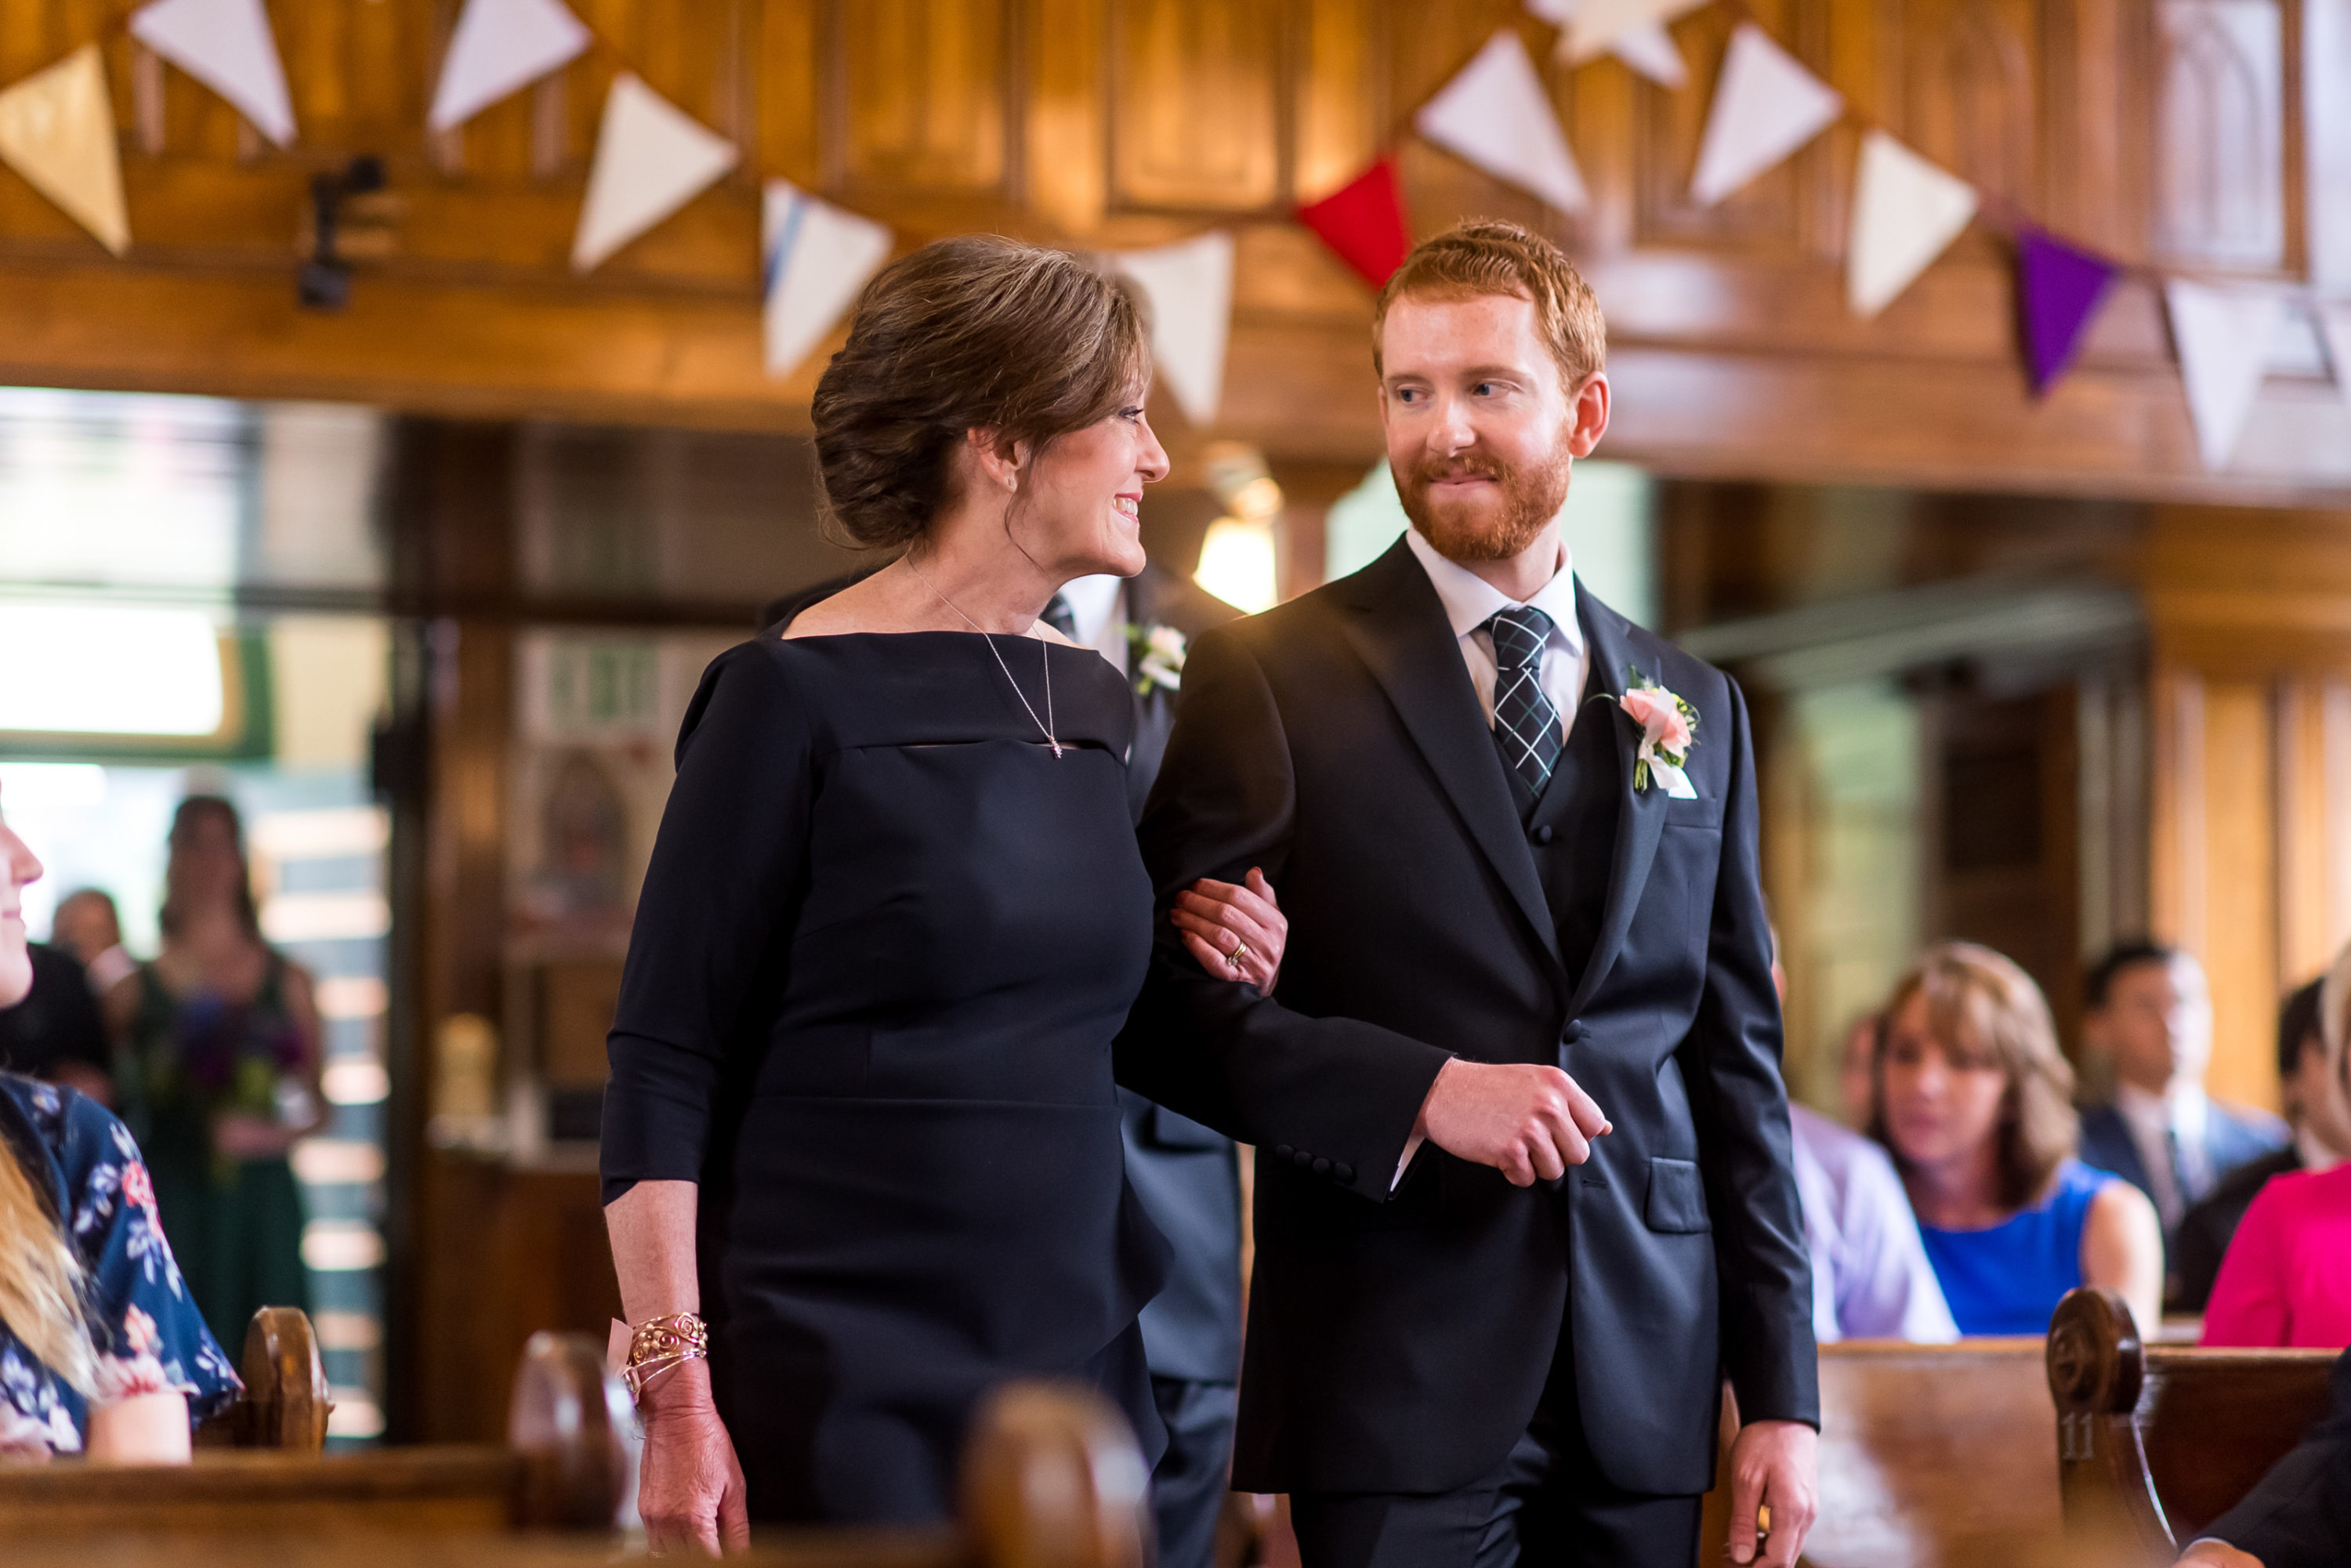 The groom and his mother process in to St. Patrick's Catholic Church in Telluride, Colorado.